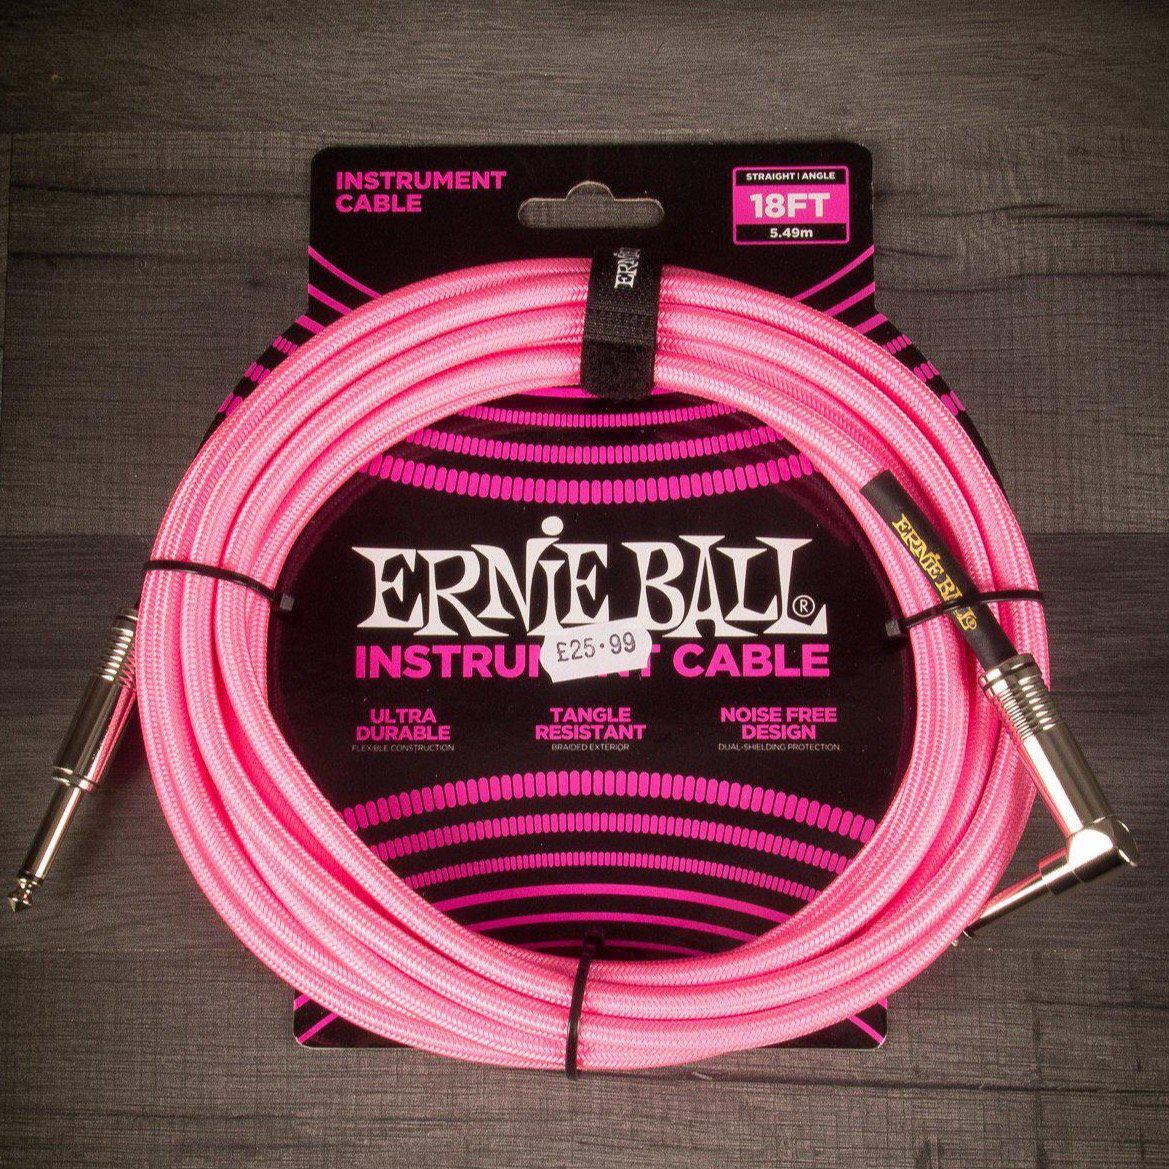 Ernie Ball Accessories Ernie Ball Angled Guitar Cable Neon Pink - 18 Ft